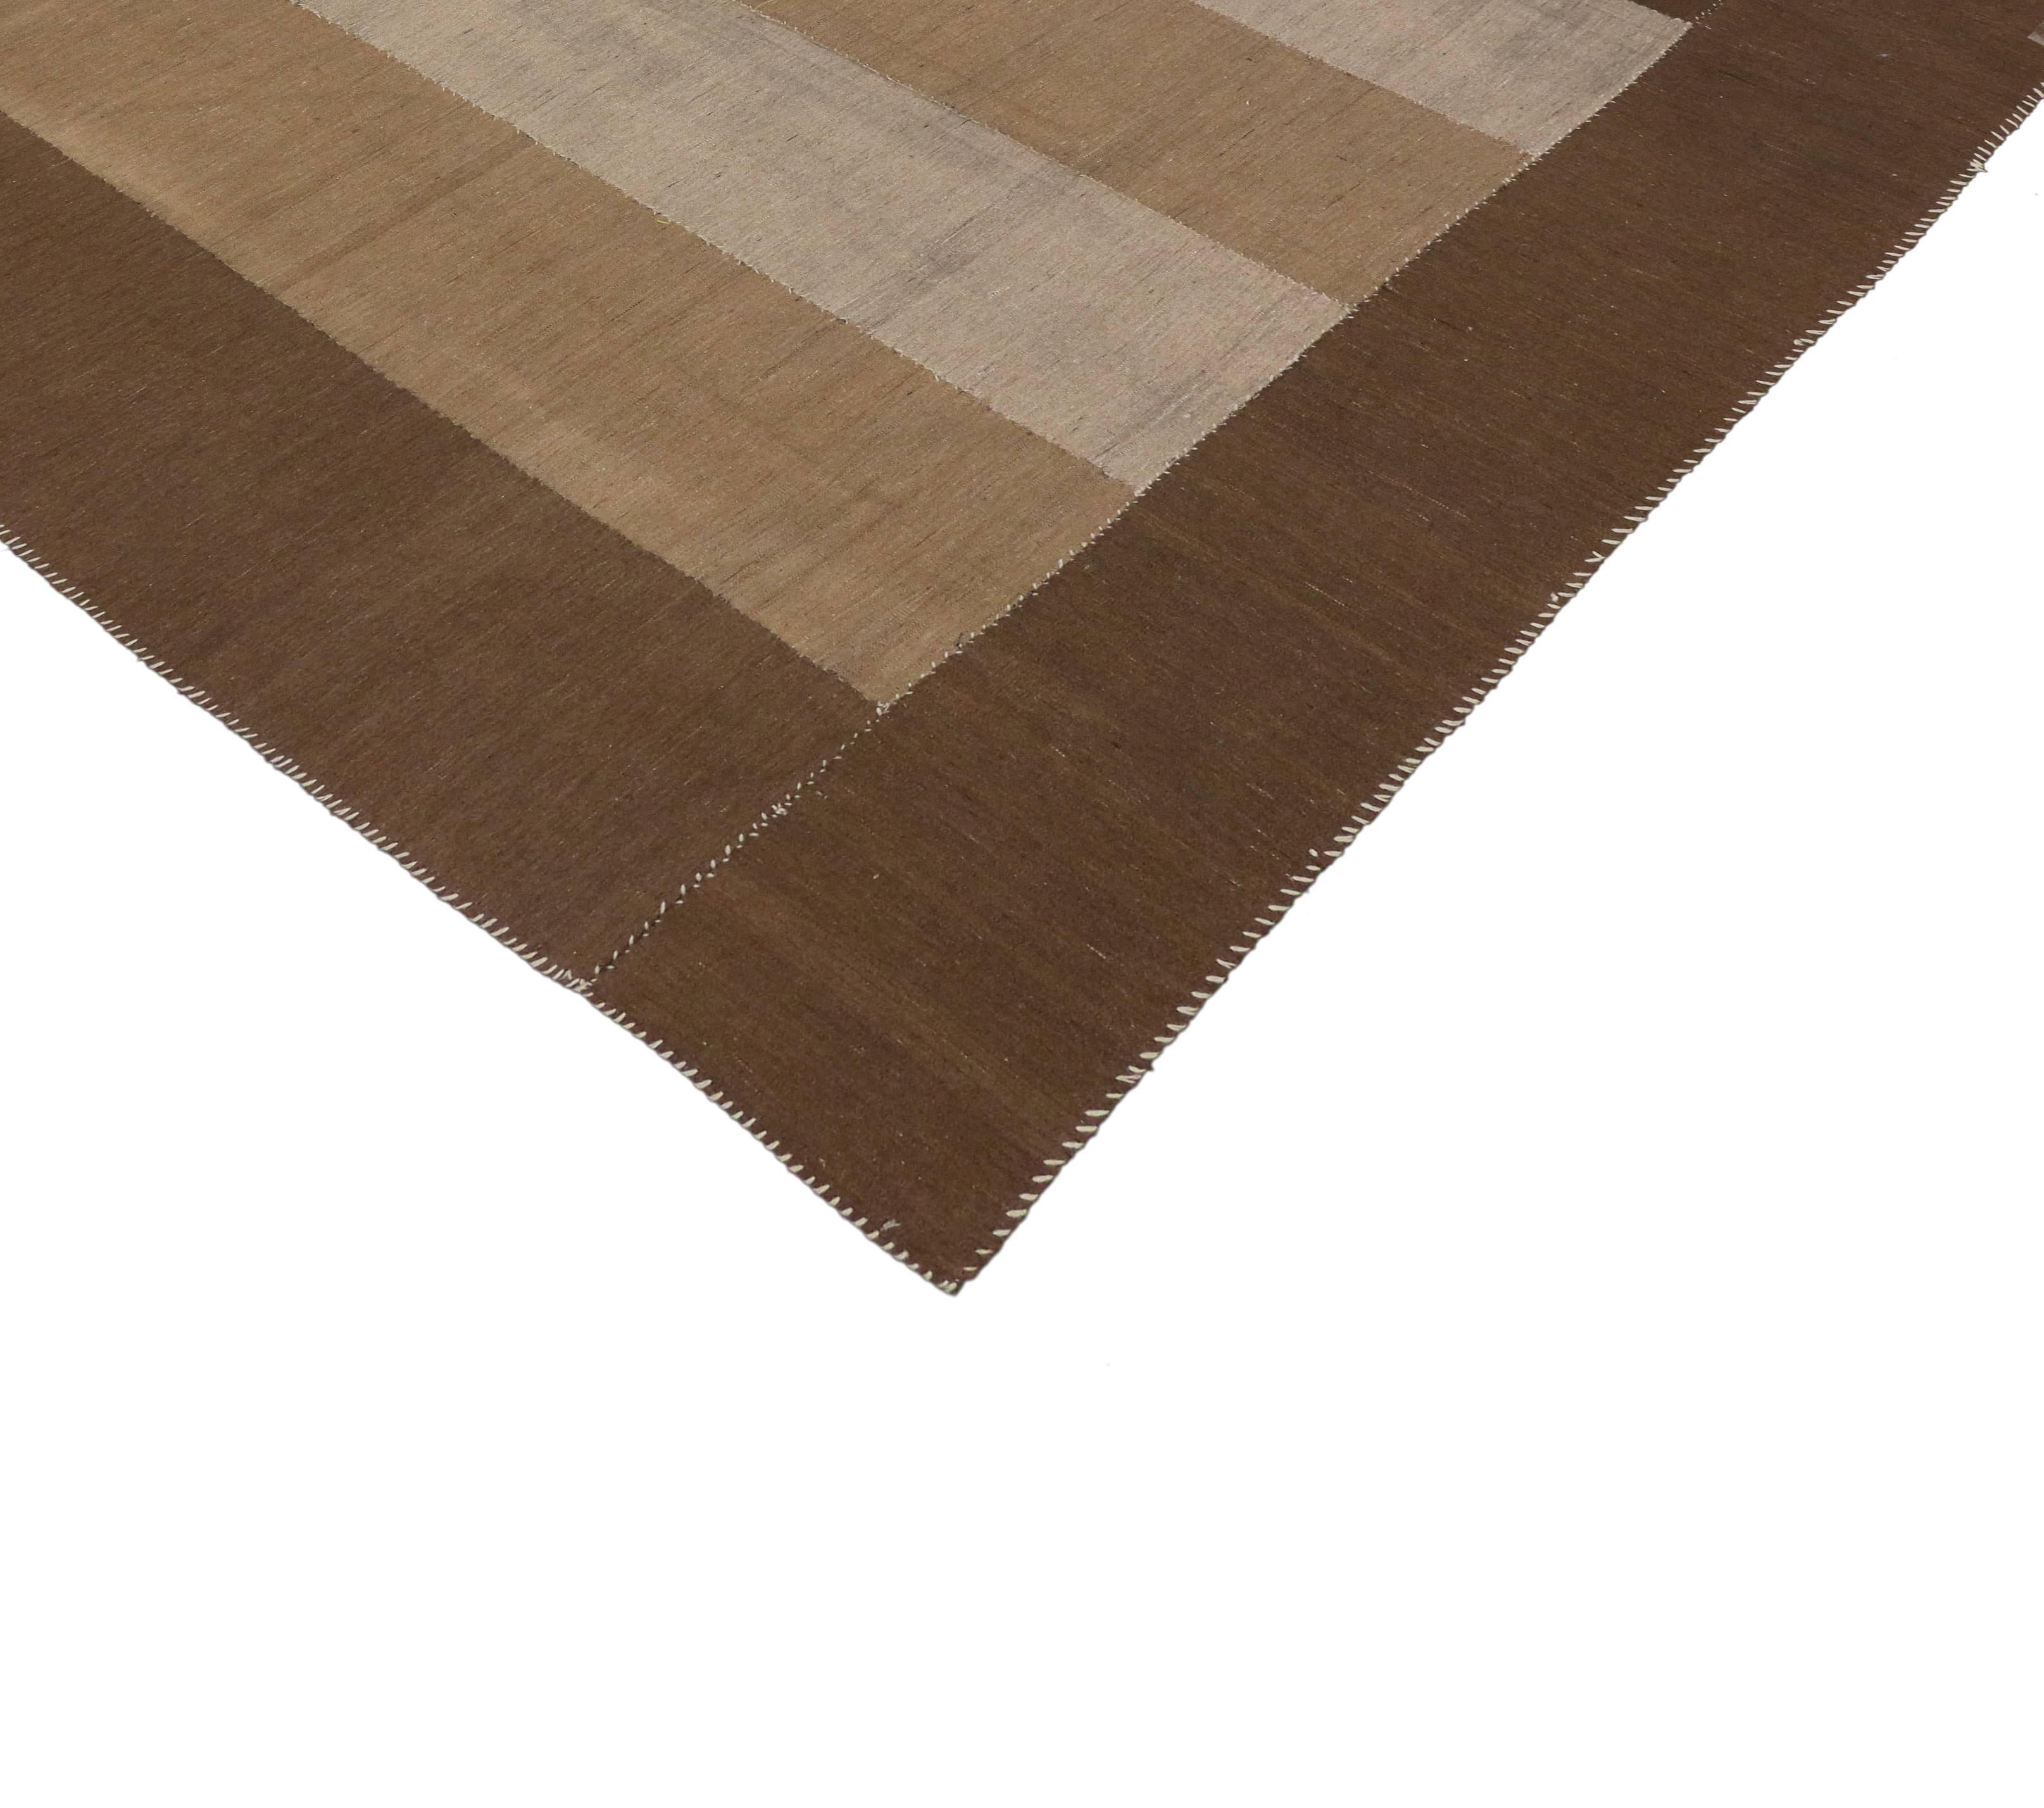 76387 vintage Persian Kilim rug with modern style. Create a comfortable and modern setting with this vintage Persian Kilim from Iran. Featuring a simplistic style and modest palette, these earthy shades of brown are excellent color combinations for